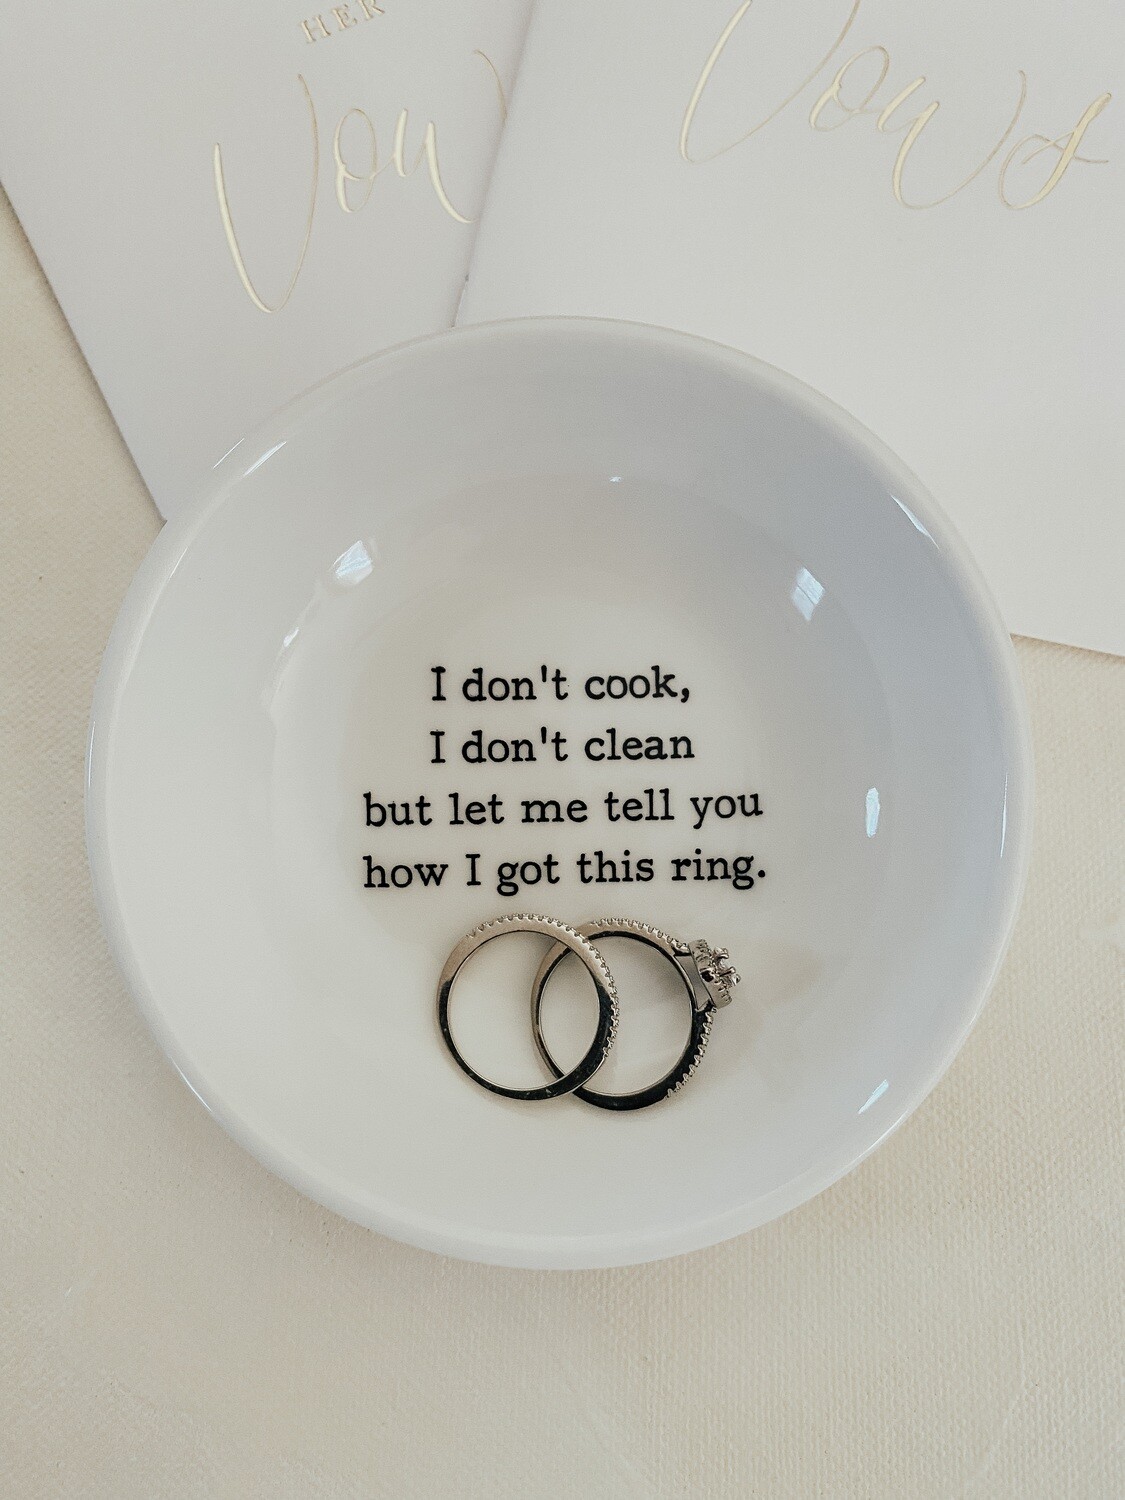 I don't cook, I don't clean - Ring Dish